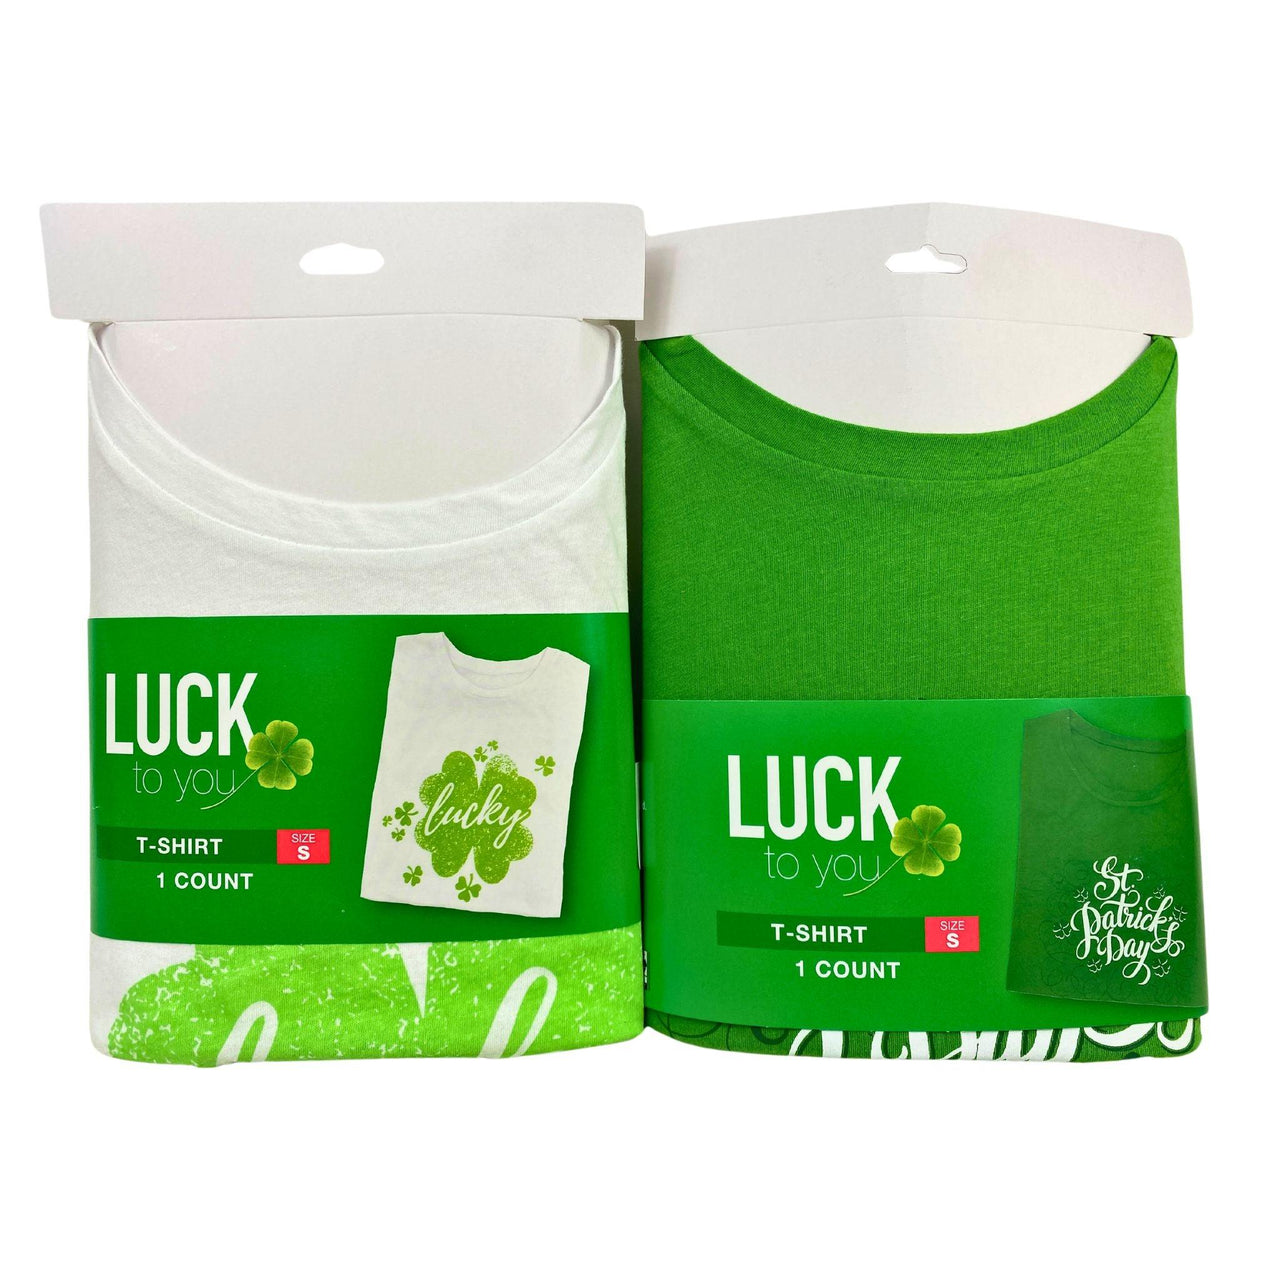 Luck To You St.Patrick's Day - Includes Sizes S,M,L,XL (48 Pcs Lot) - Discount Wholesalers Inc